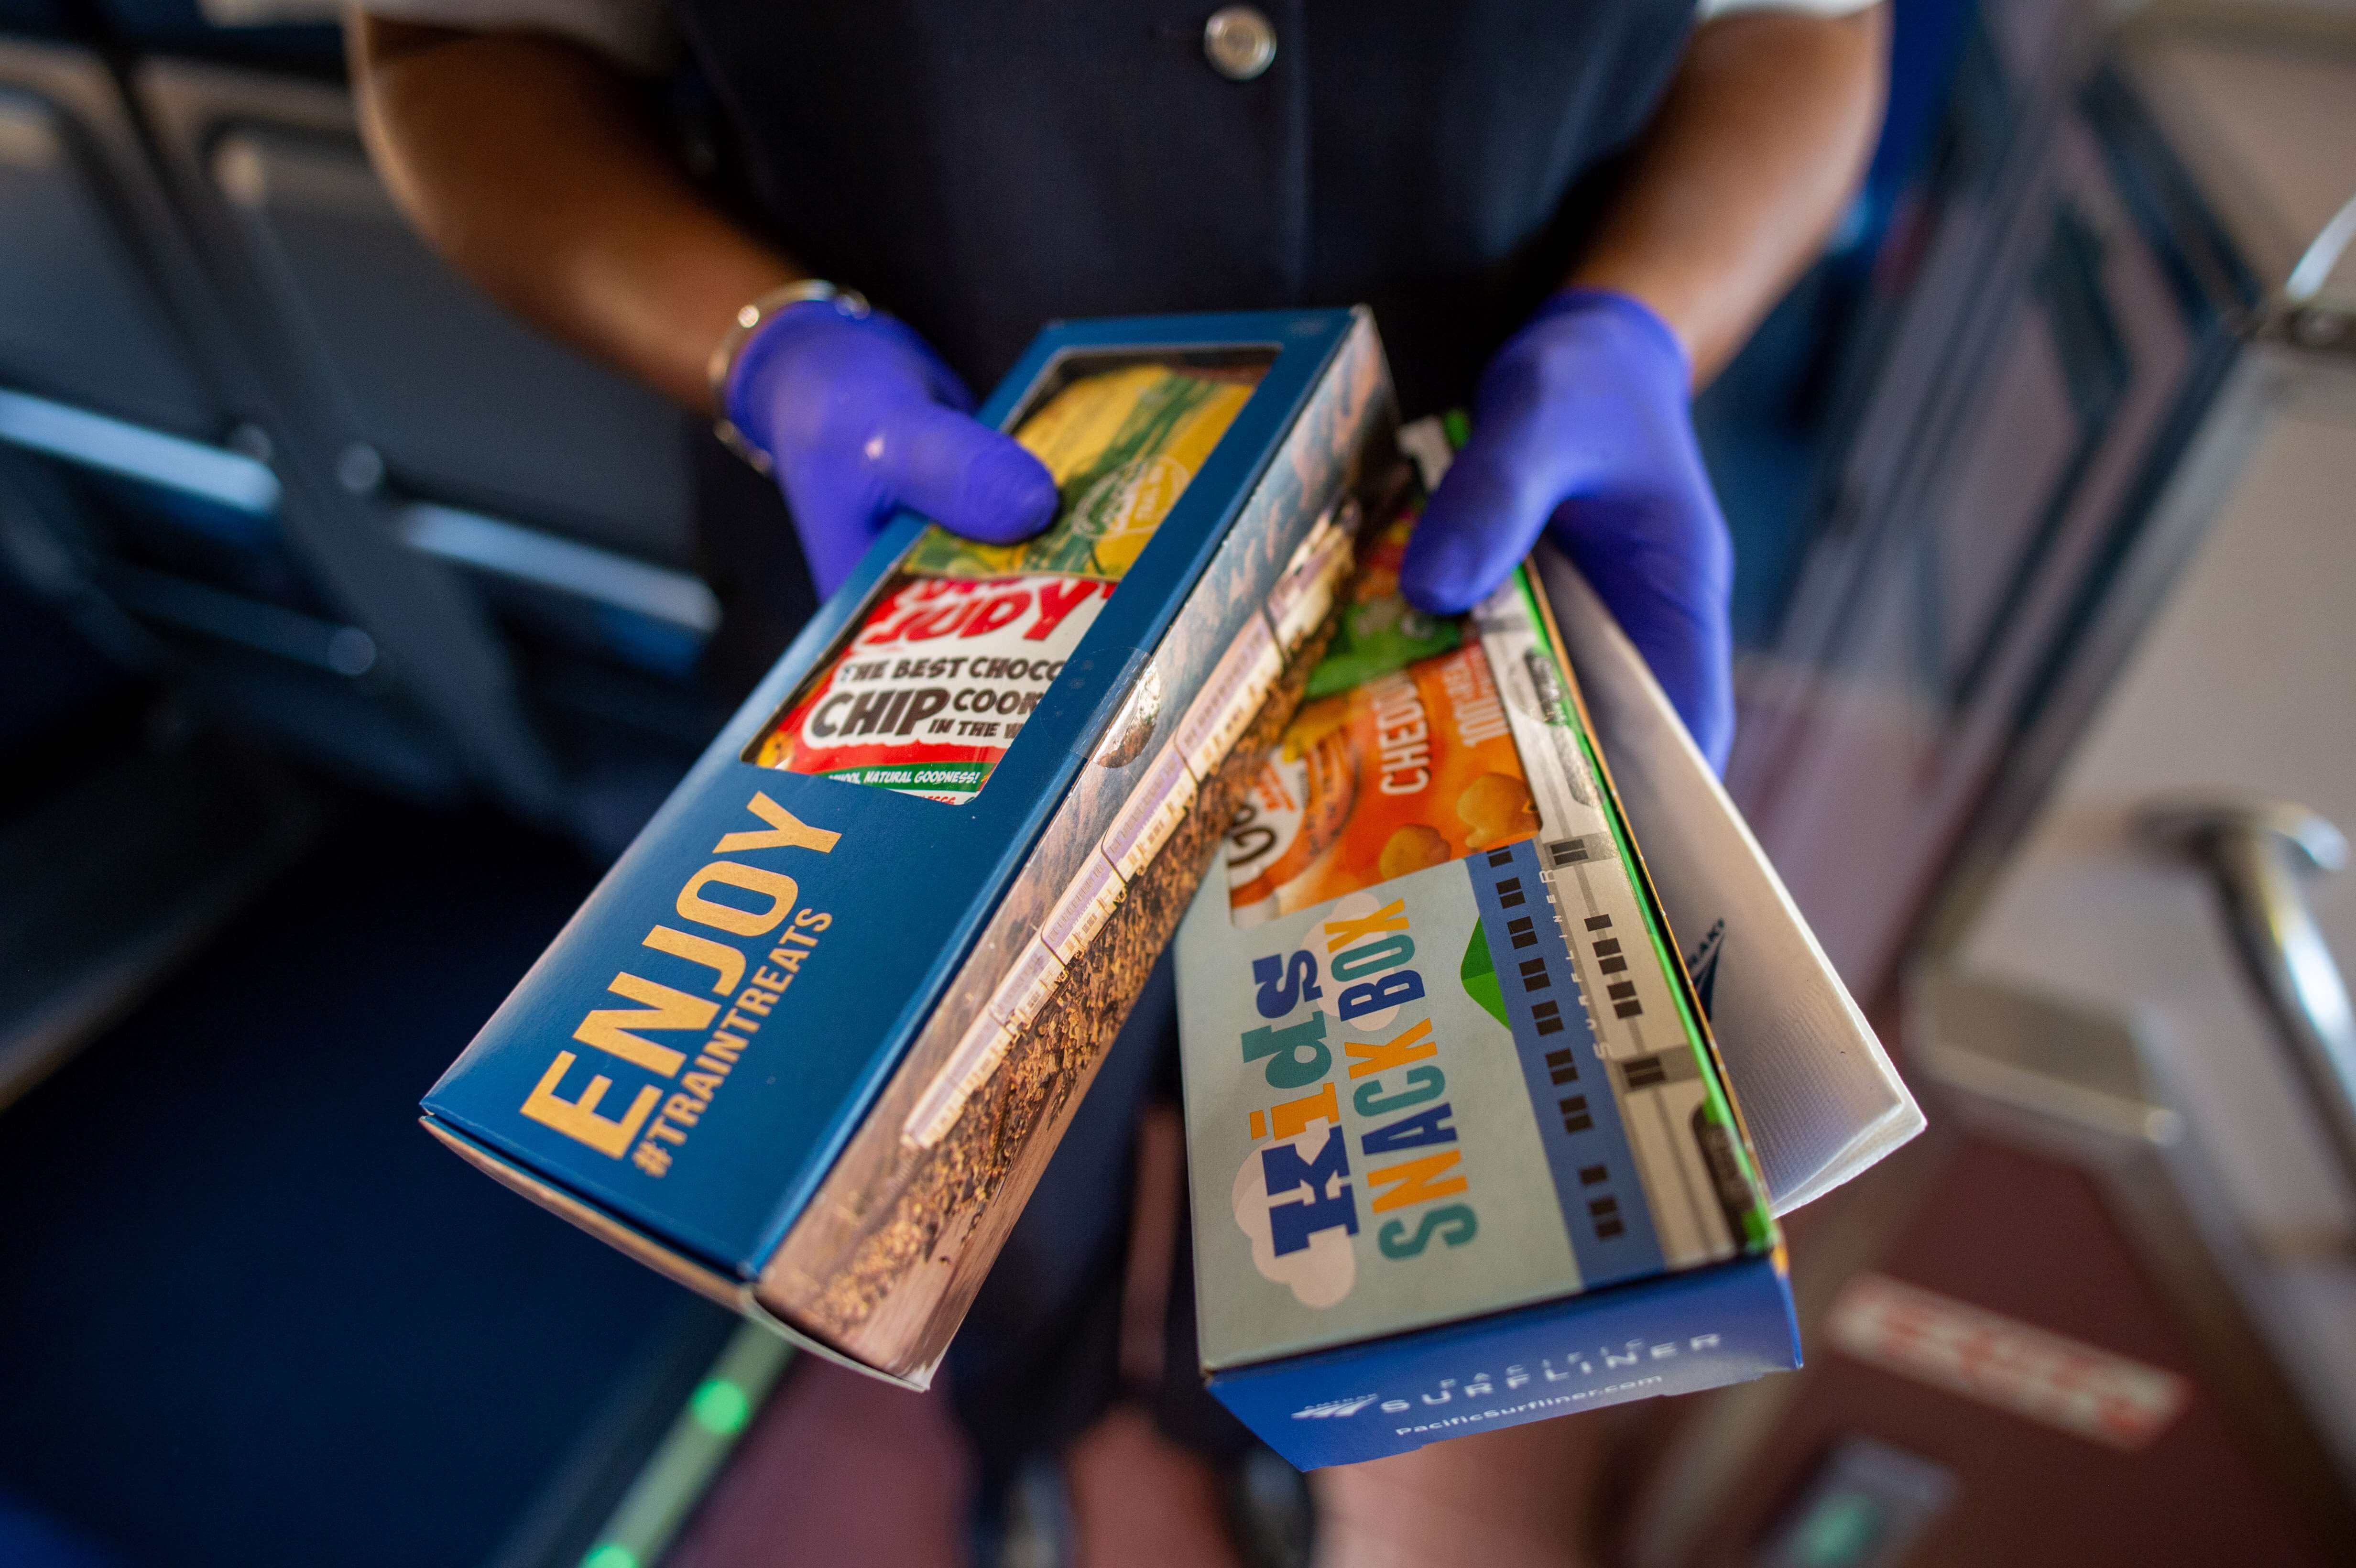 An attendant onboard the Amtrak Pacific Surfliner offers Business Class and kids snack boxes to the camera.